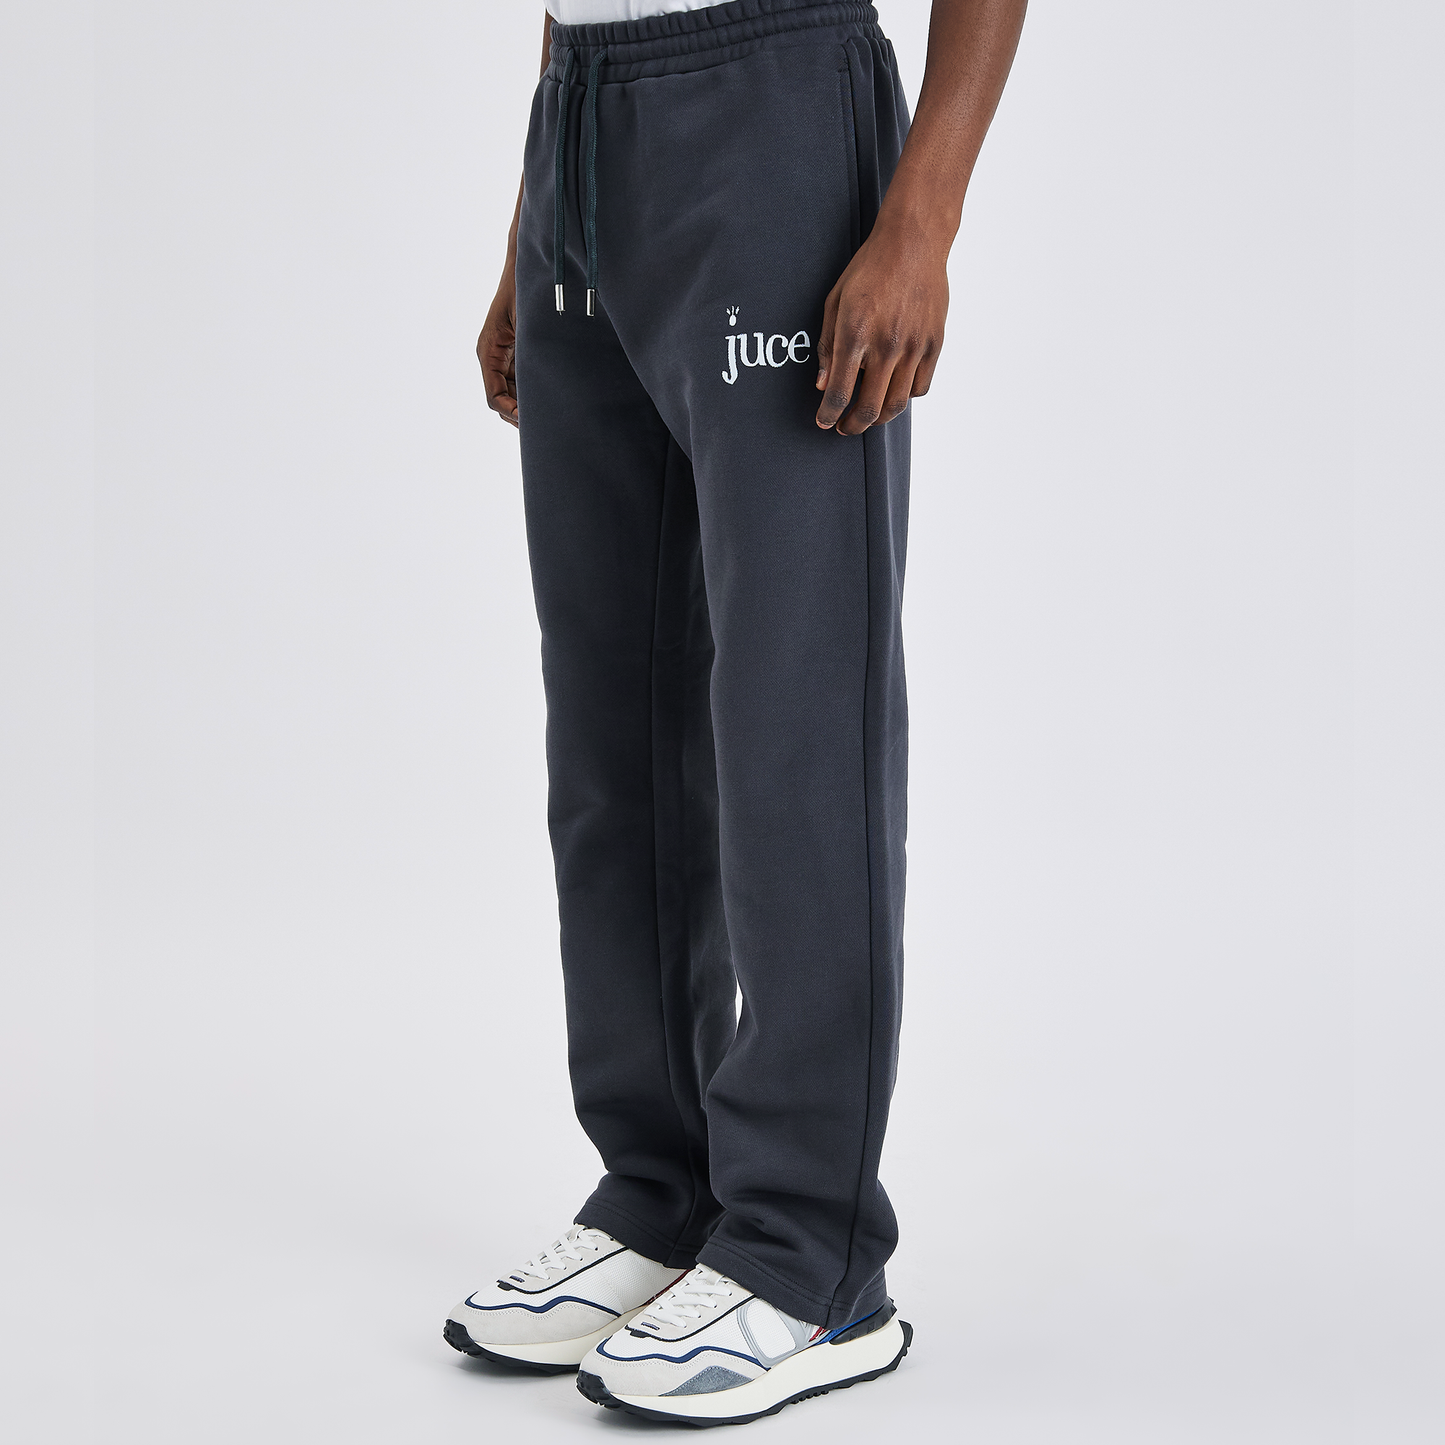 Relaxed Hale Navy Sweatpants